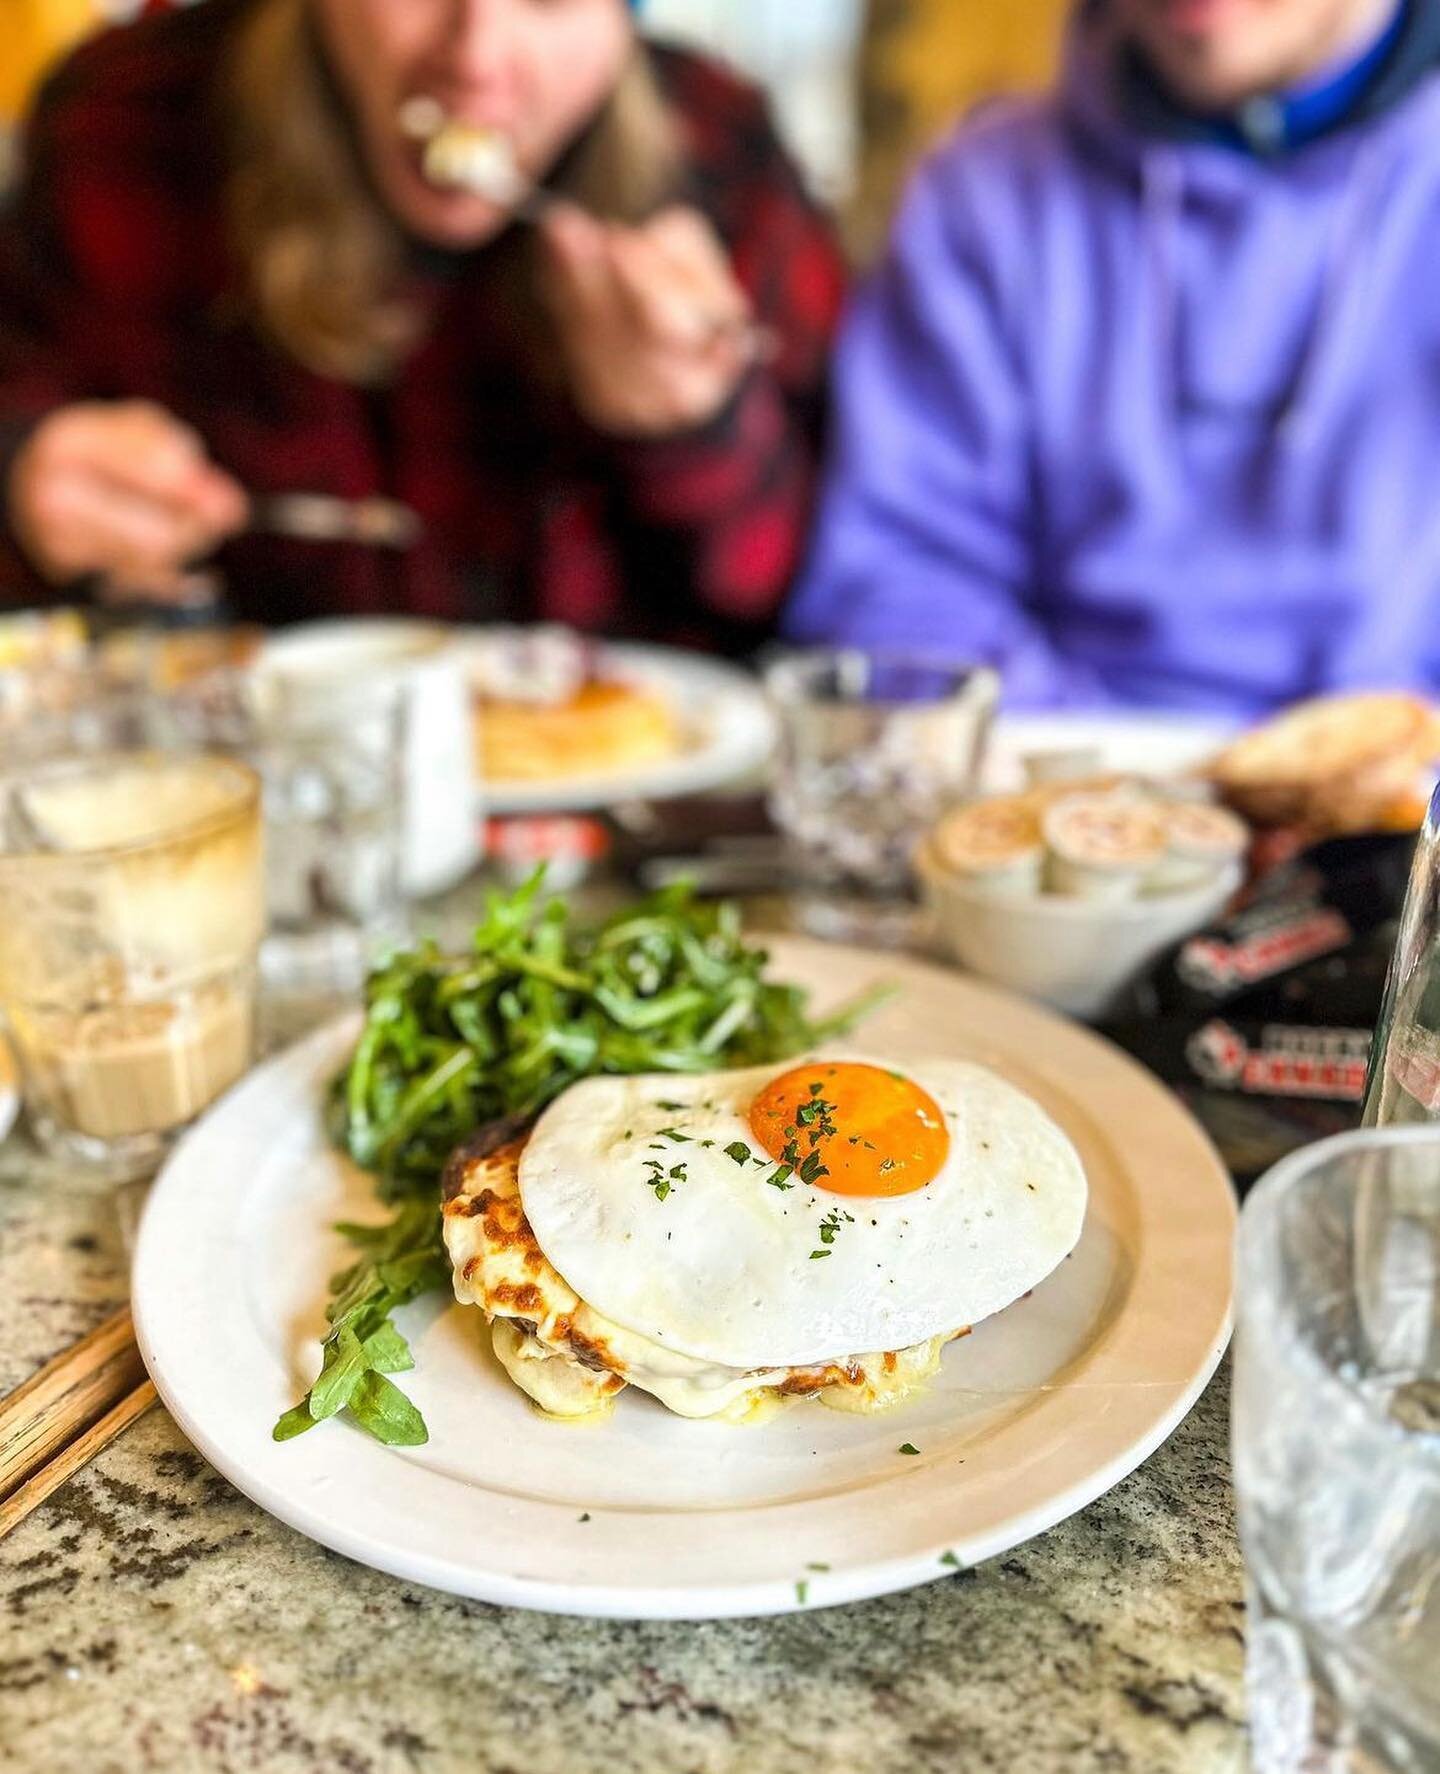 Feeling a little egg-stravagent? Give our Croque Madame try. 😉🍳

📸: @ellielwilliams_